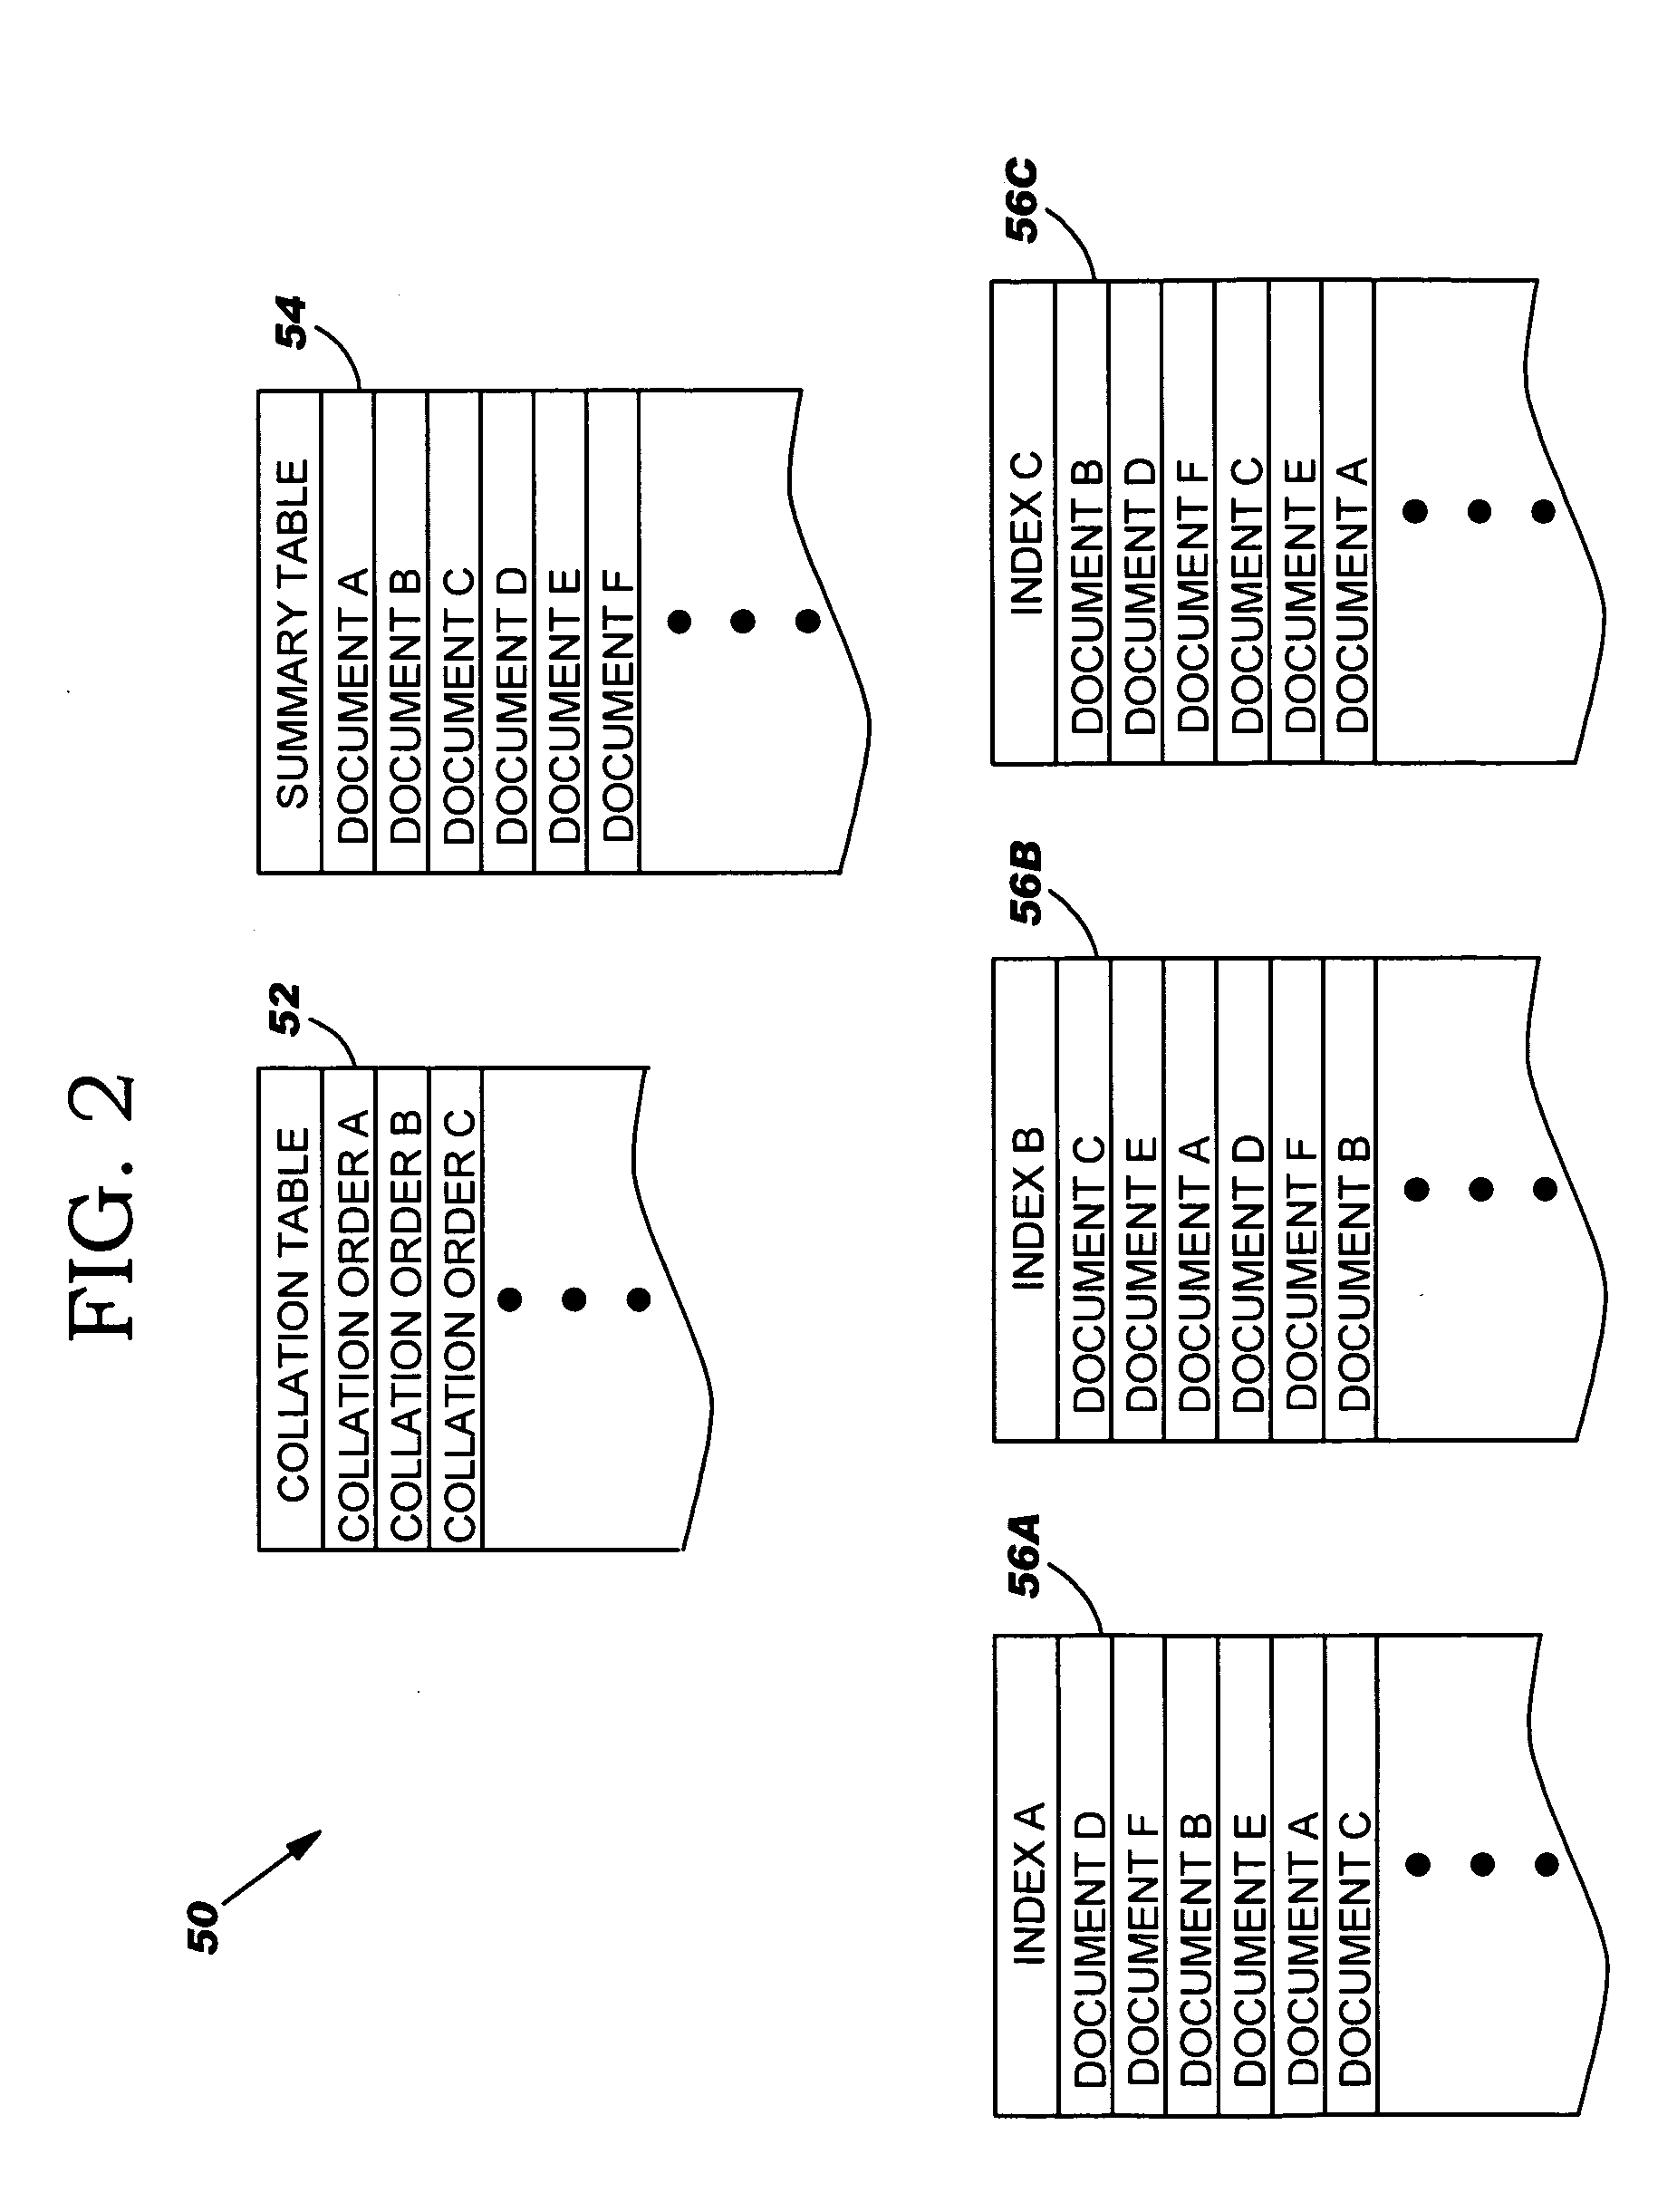 Method, system and program product for managing document summary information